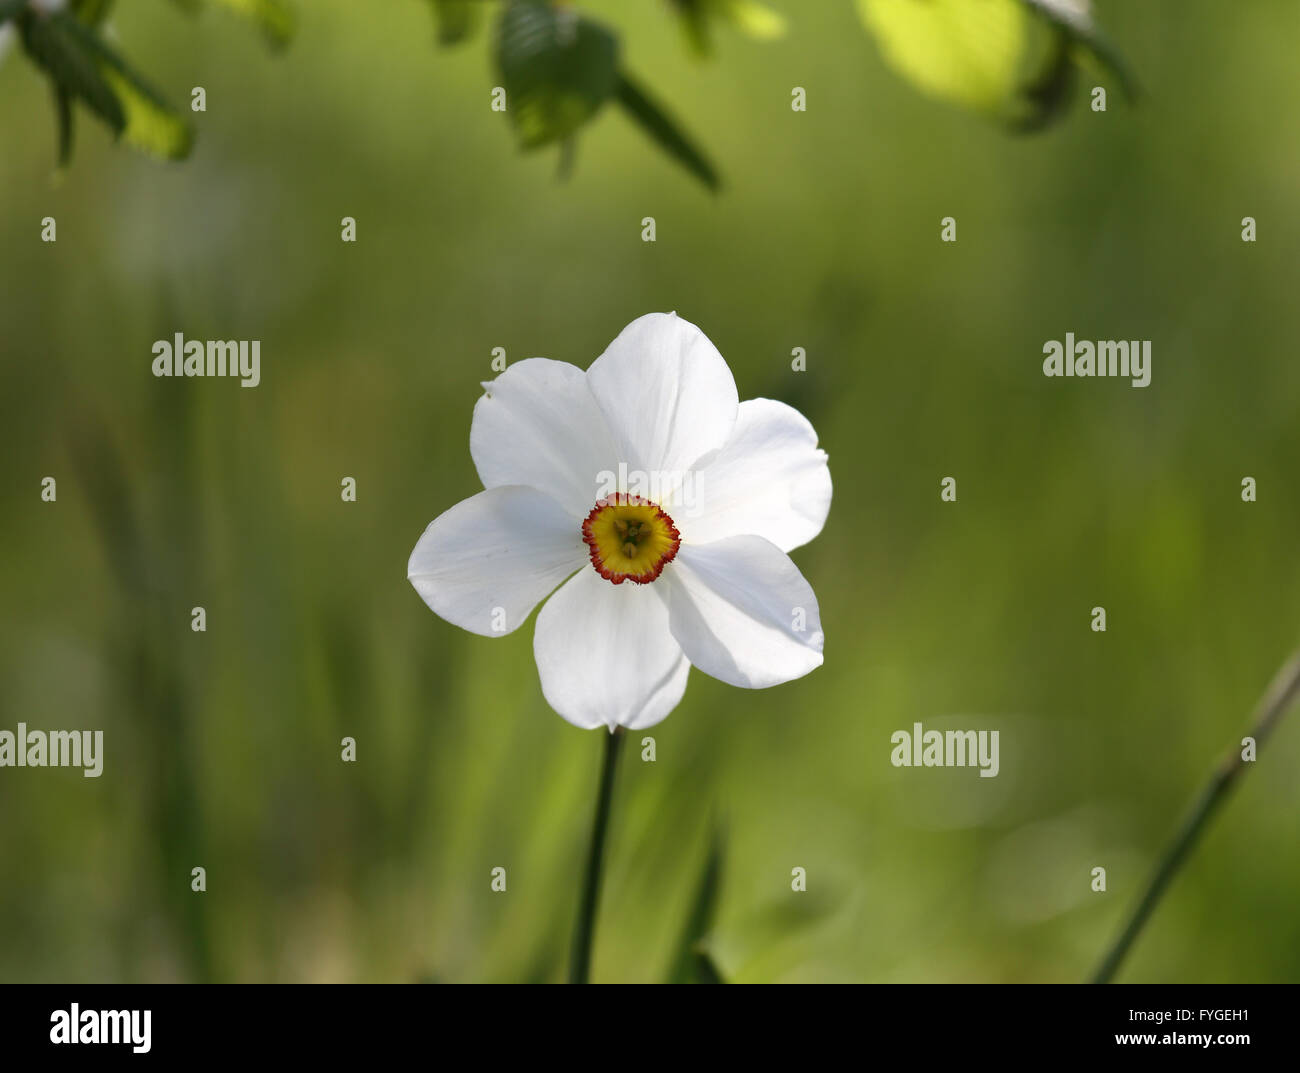 Single white narcissus, Narcissus poeticus, in the foreground with blurred greenery in the background Stock Photo